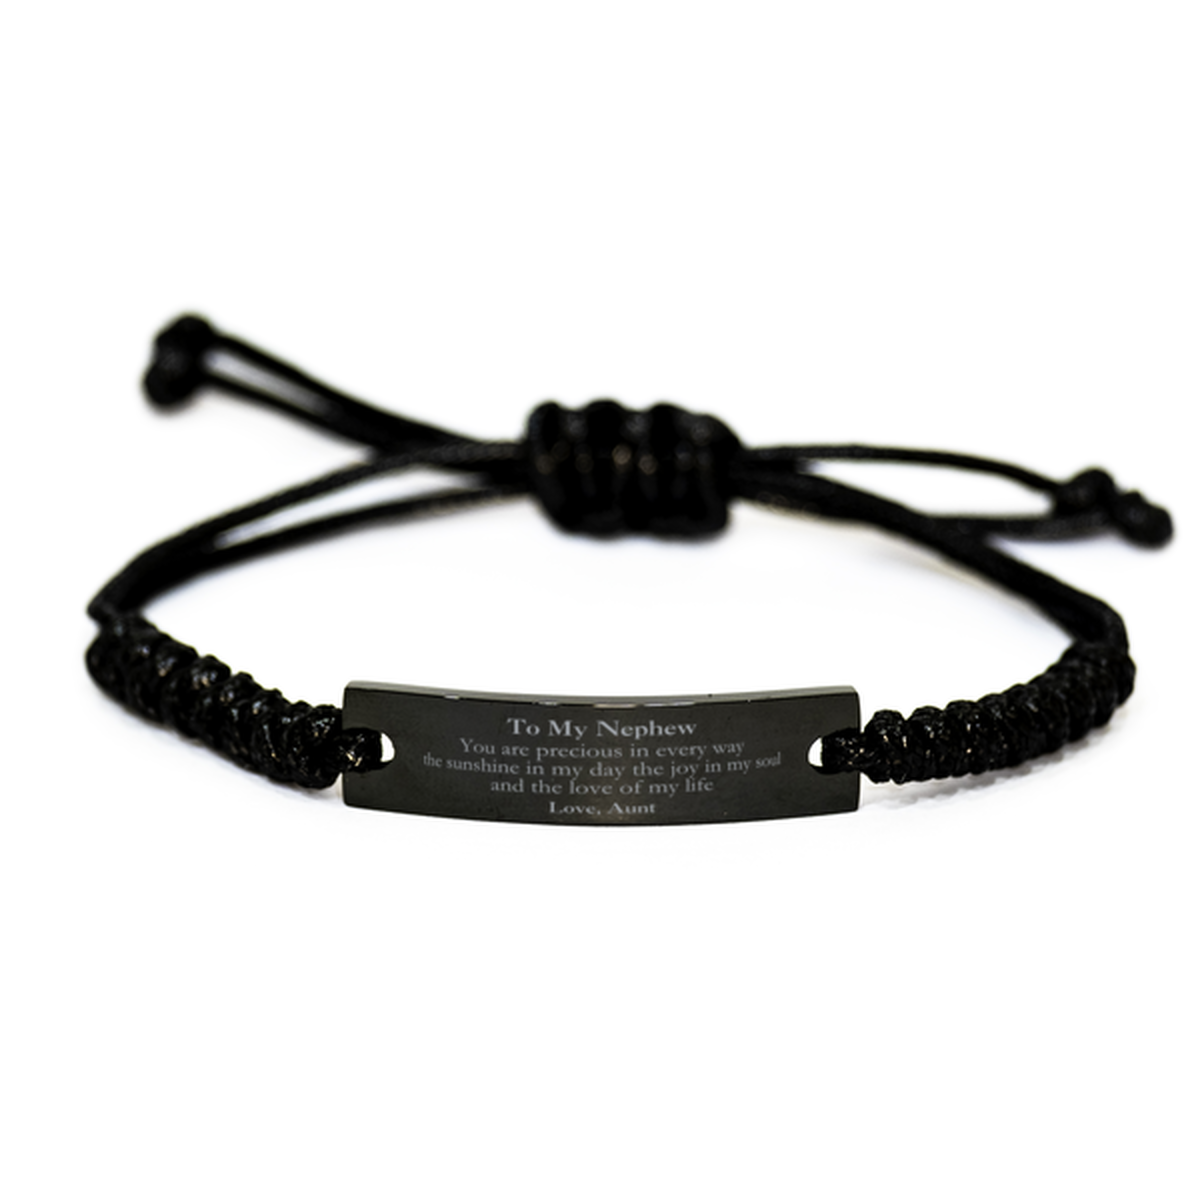 Graduation Gifts for Nephew Black Rope Bracelet Present from Aunt, Christmas Nephew Birthday Gifts Nephew You are precious in every way the sunshine in my day. Love, Aunt